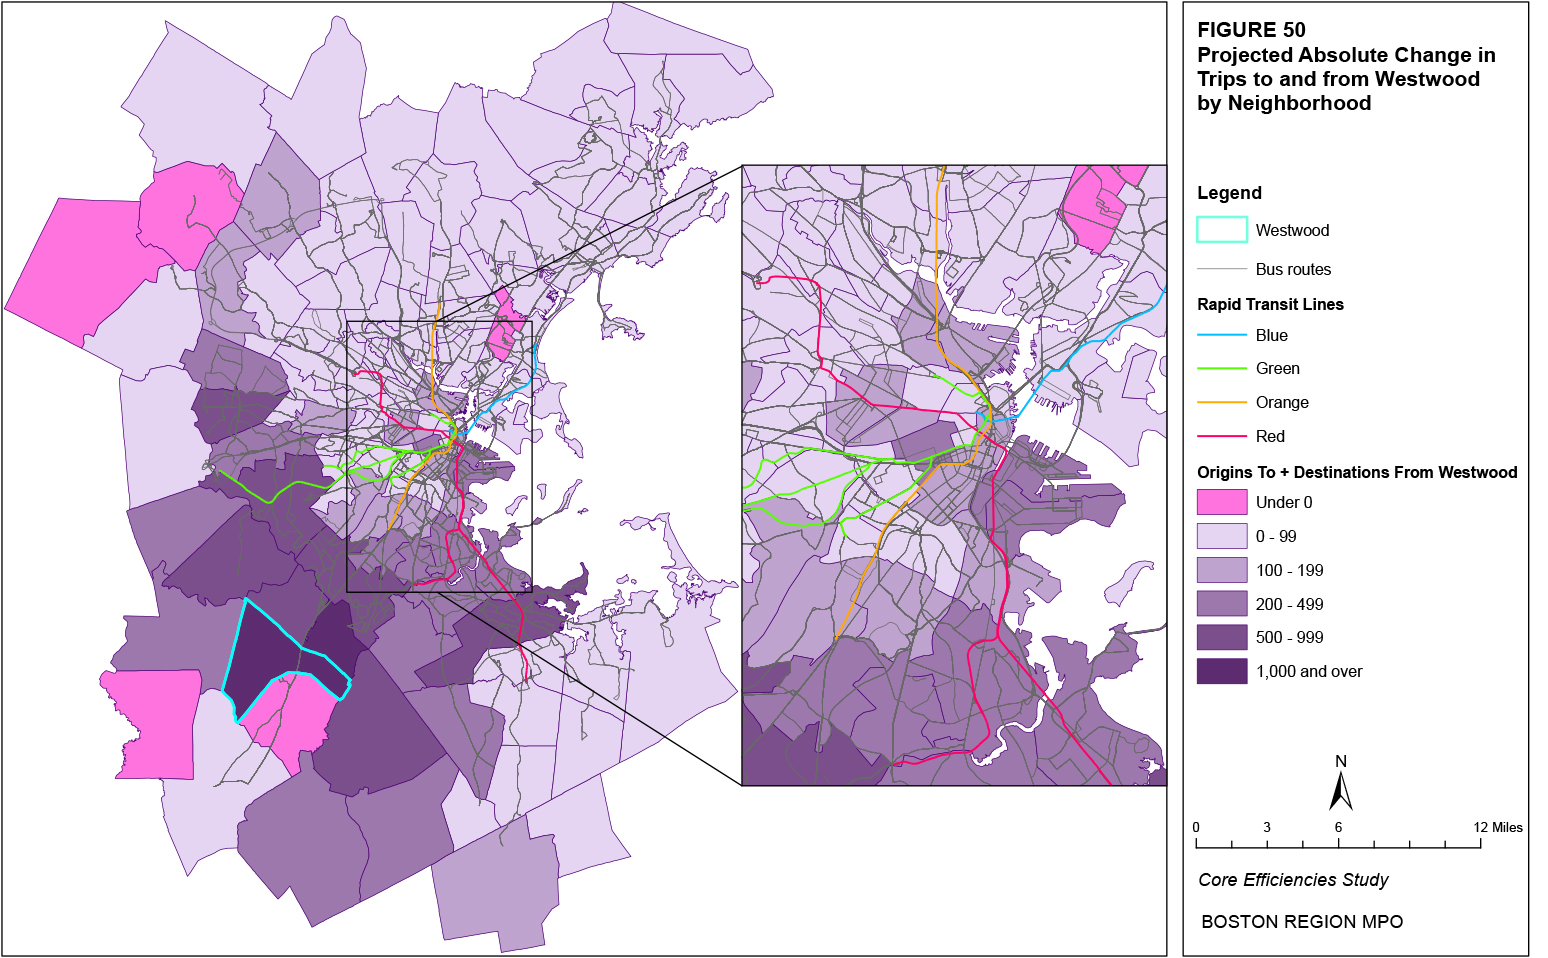 This map shows the projected absolute change in trips to and from the Westwood neighborhood by neighborhood.